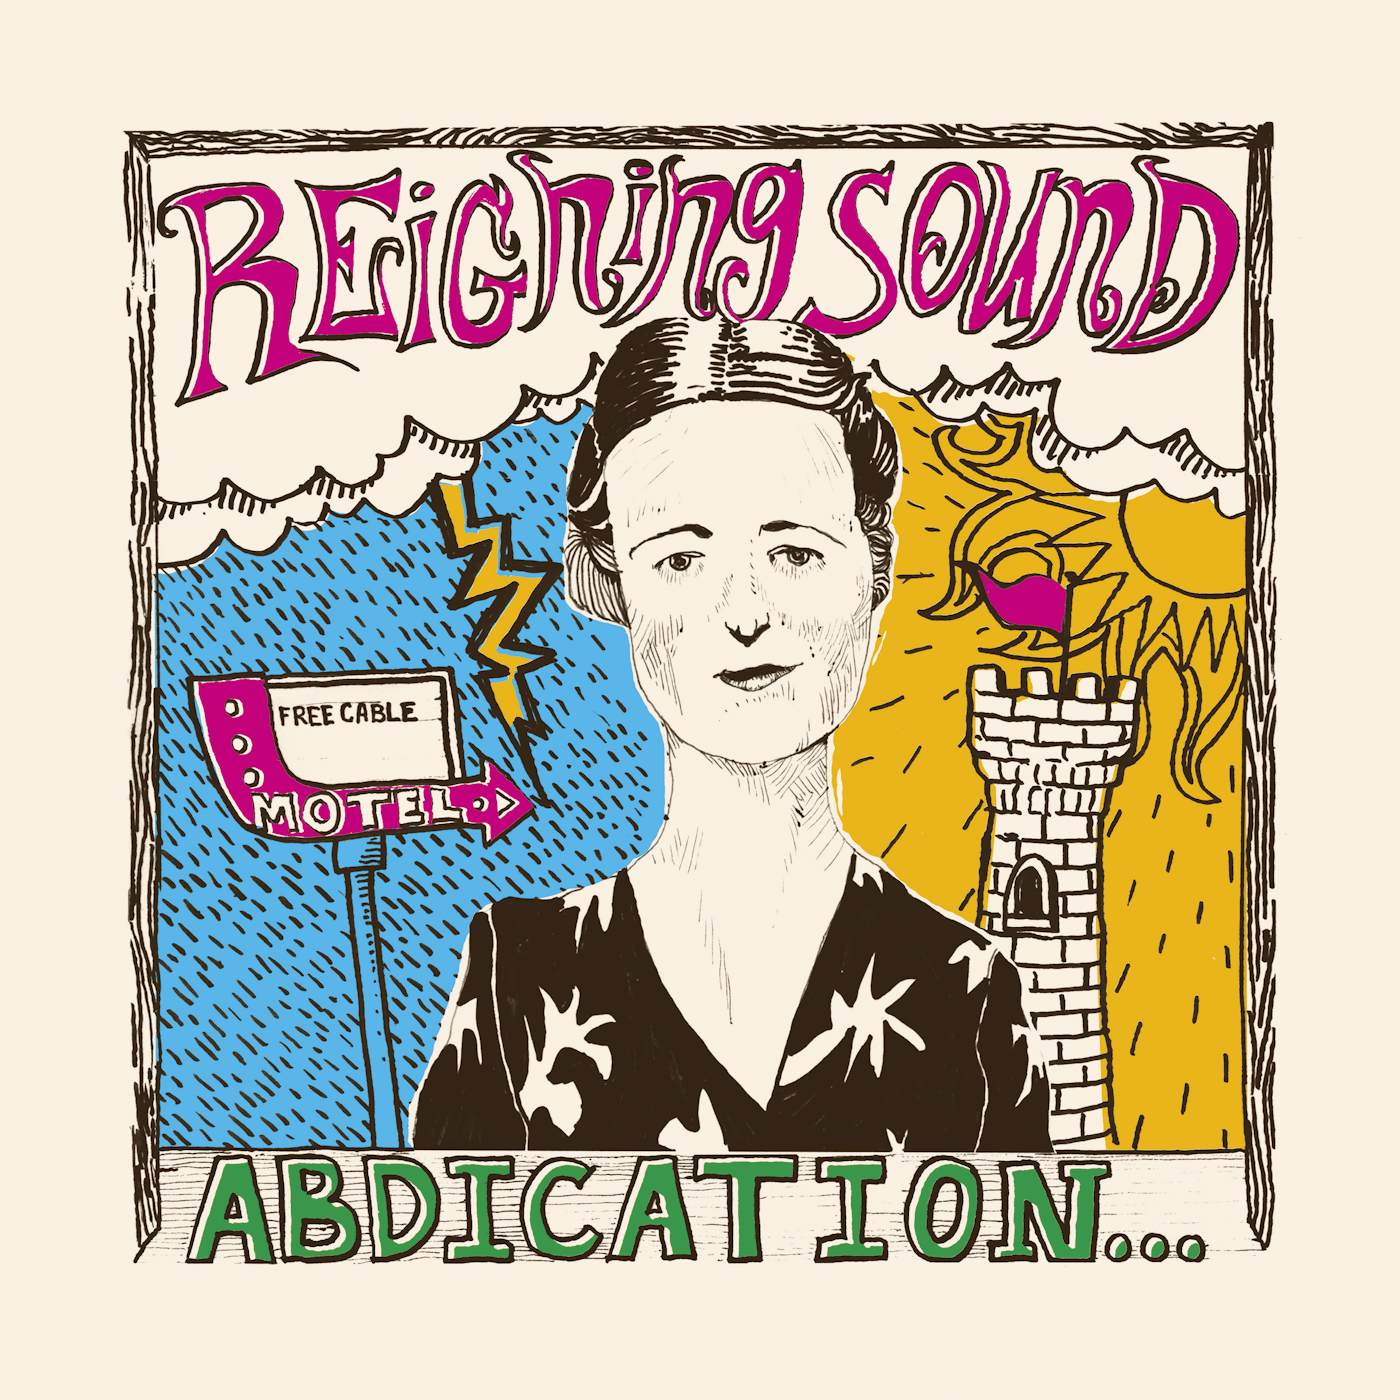 Reigning Sound ABDICATION FOR YOUR LOVE CD